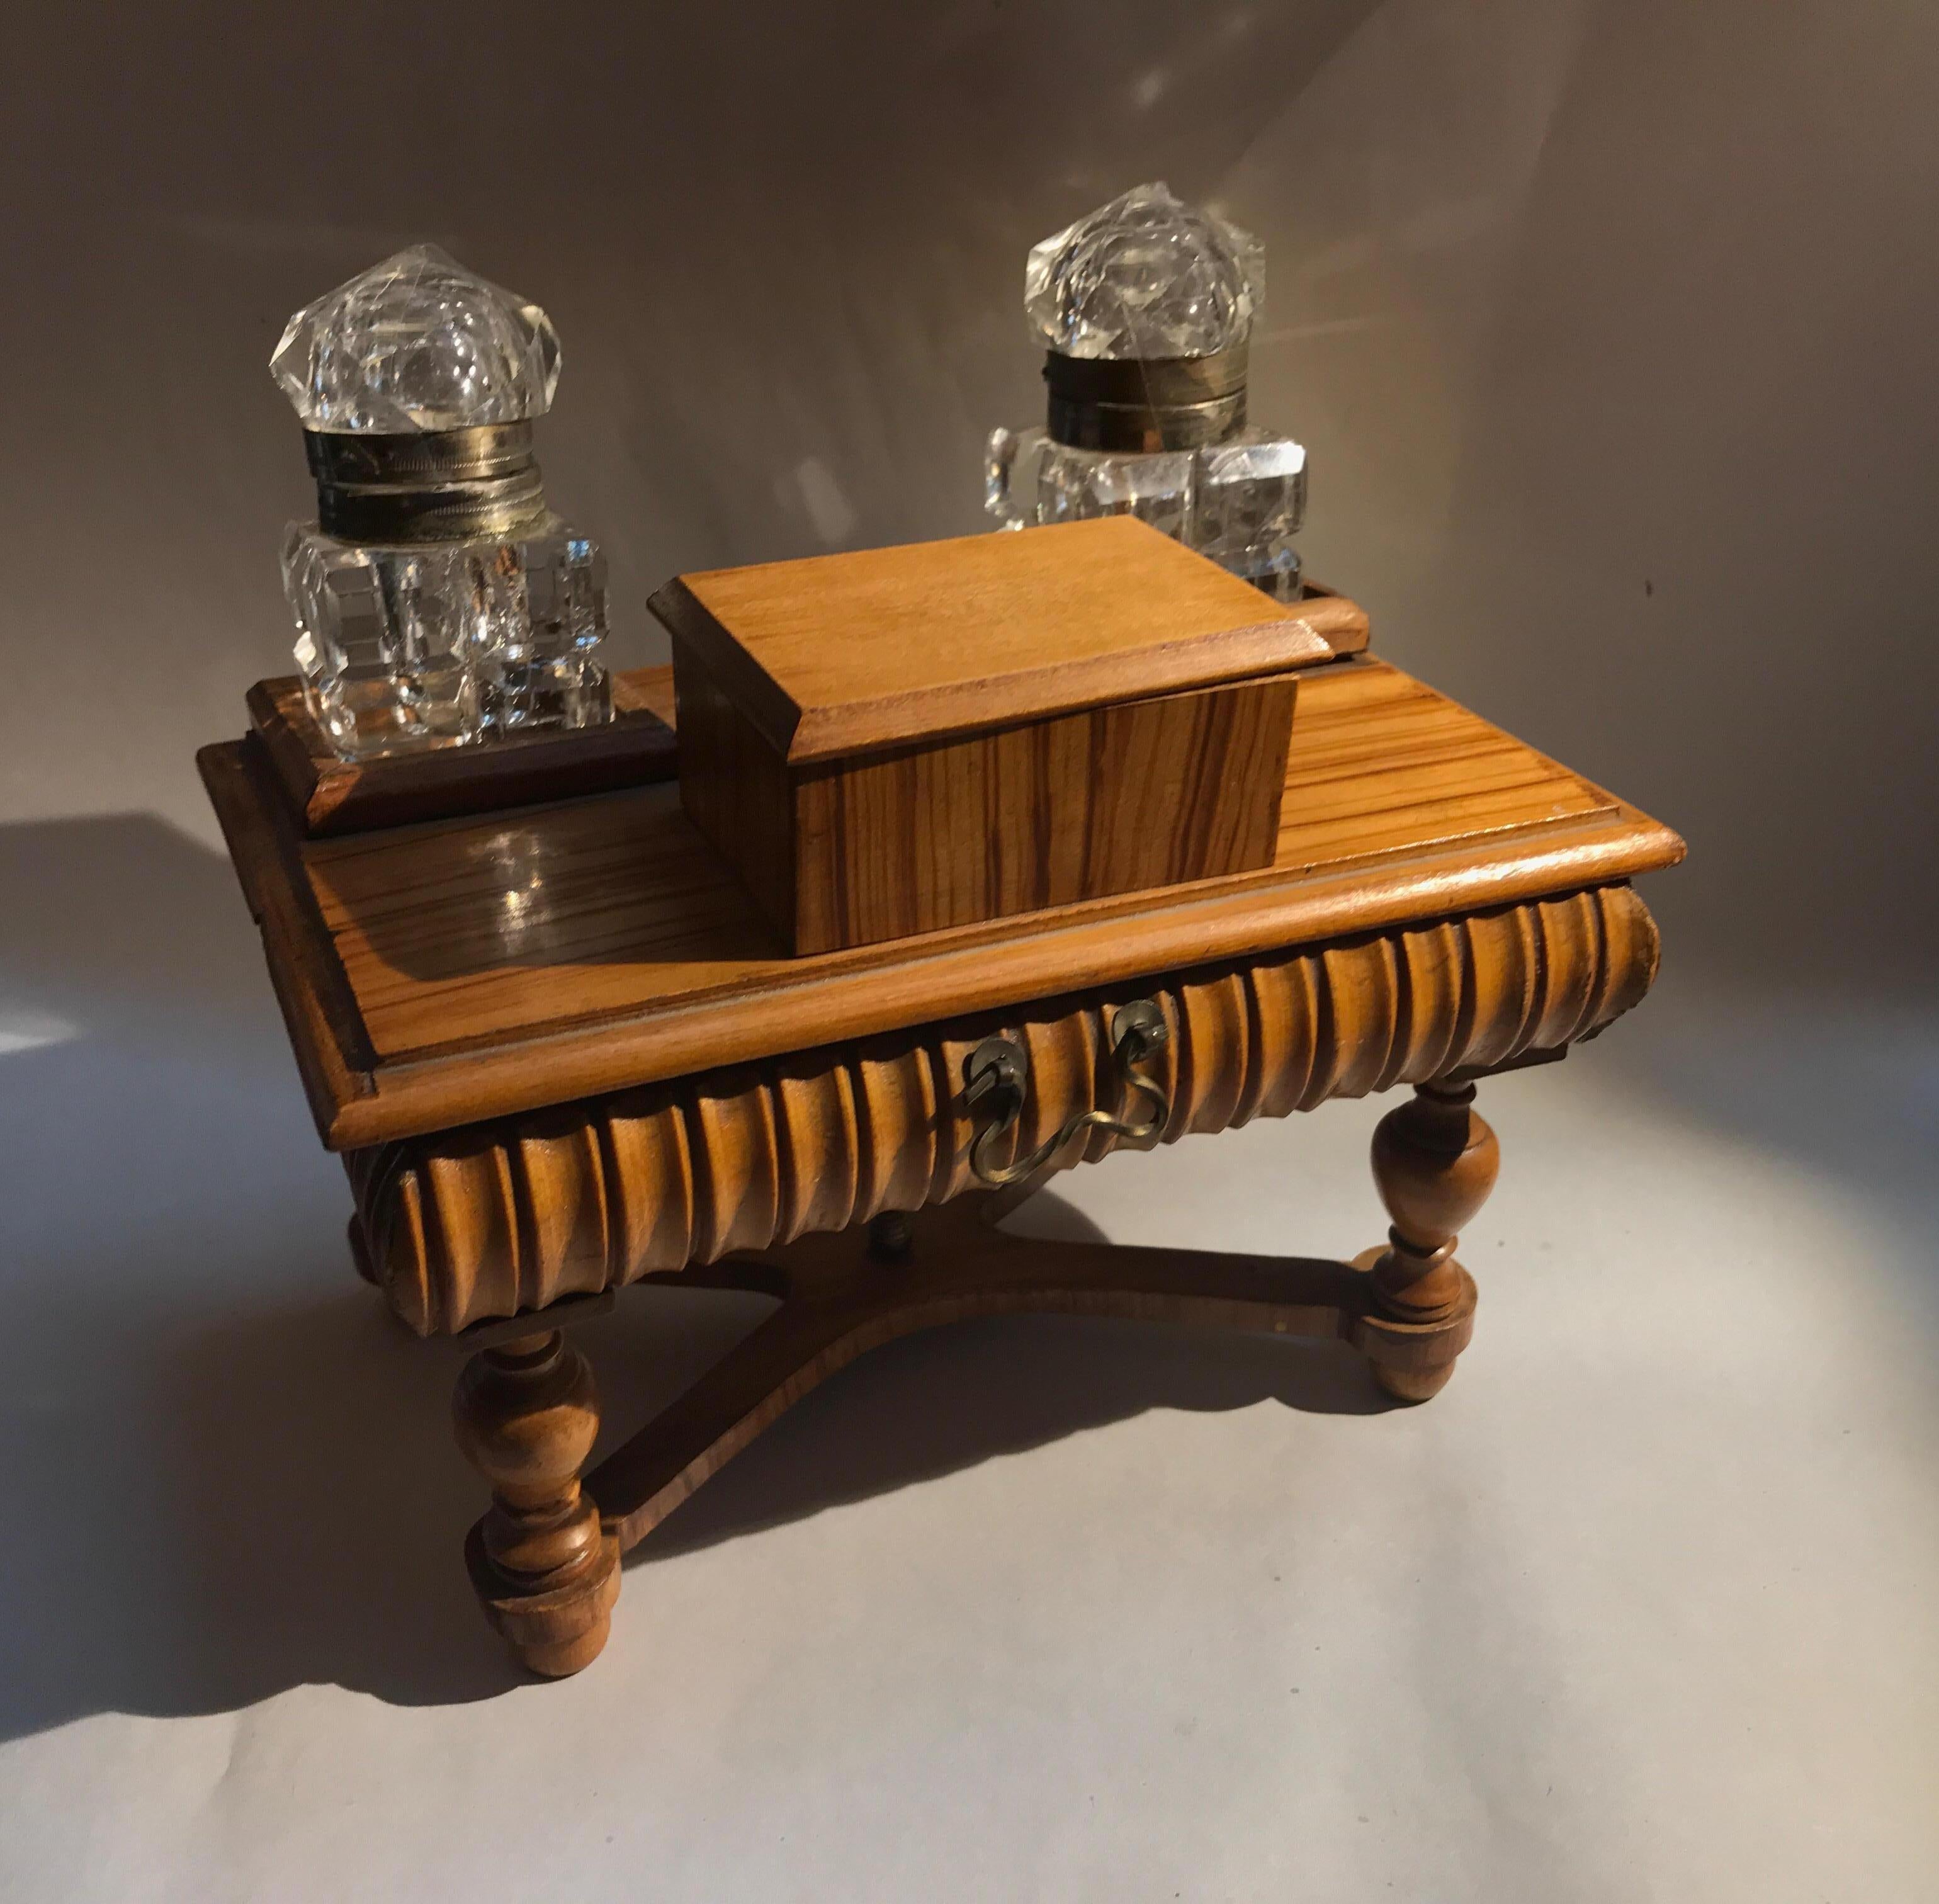 A miniature desk form inkwell and box. A double inkwell with stamp box in elm wood. The two cut-glass inkwells flank the stamp box on the top of the desk. The desk top pivots open to reveal a small storage box for pins, pen nibs and other small desk